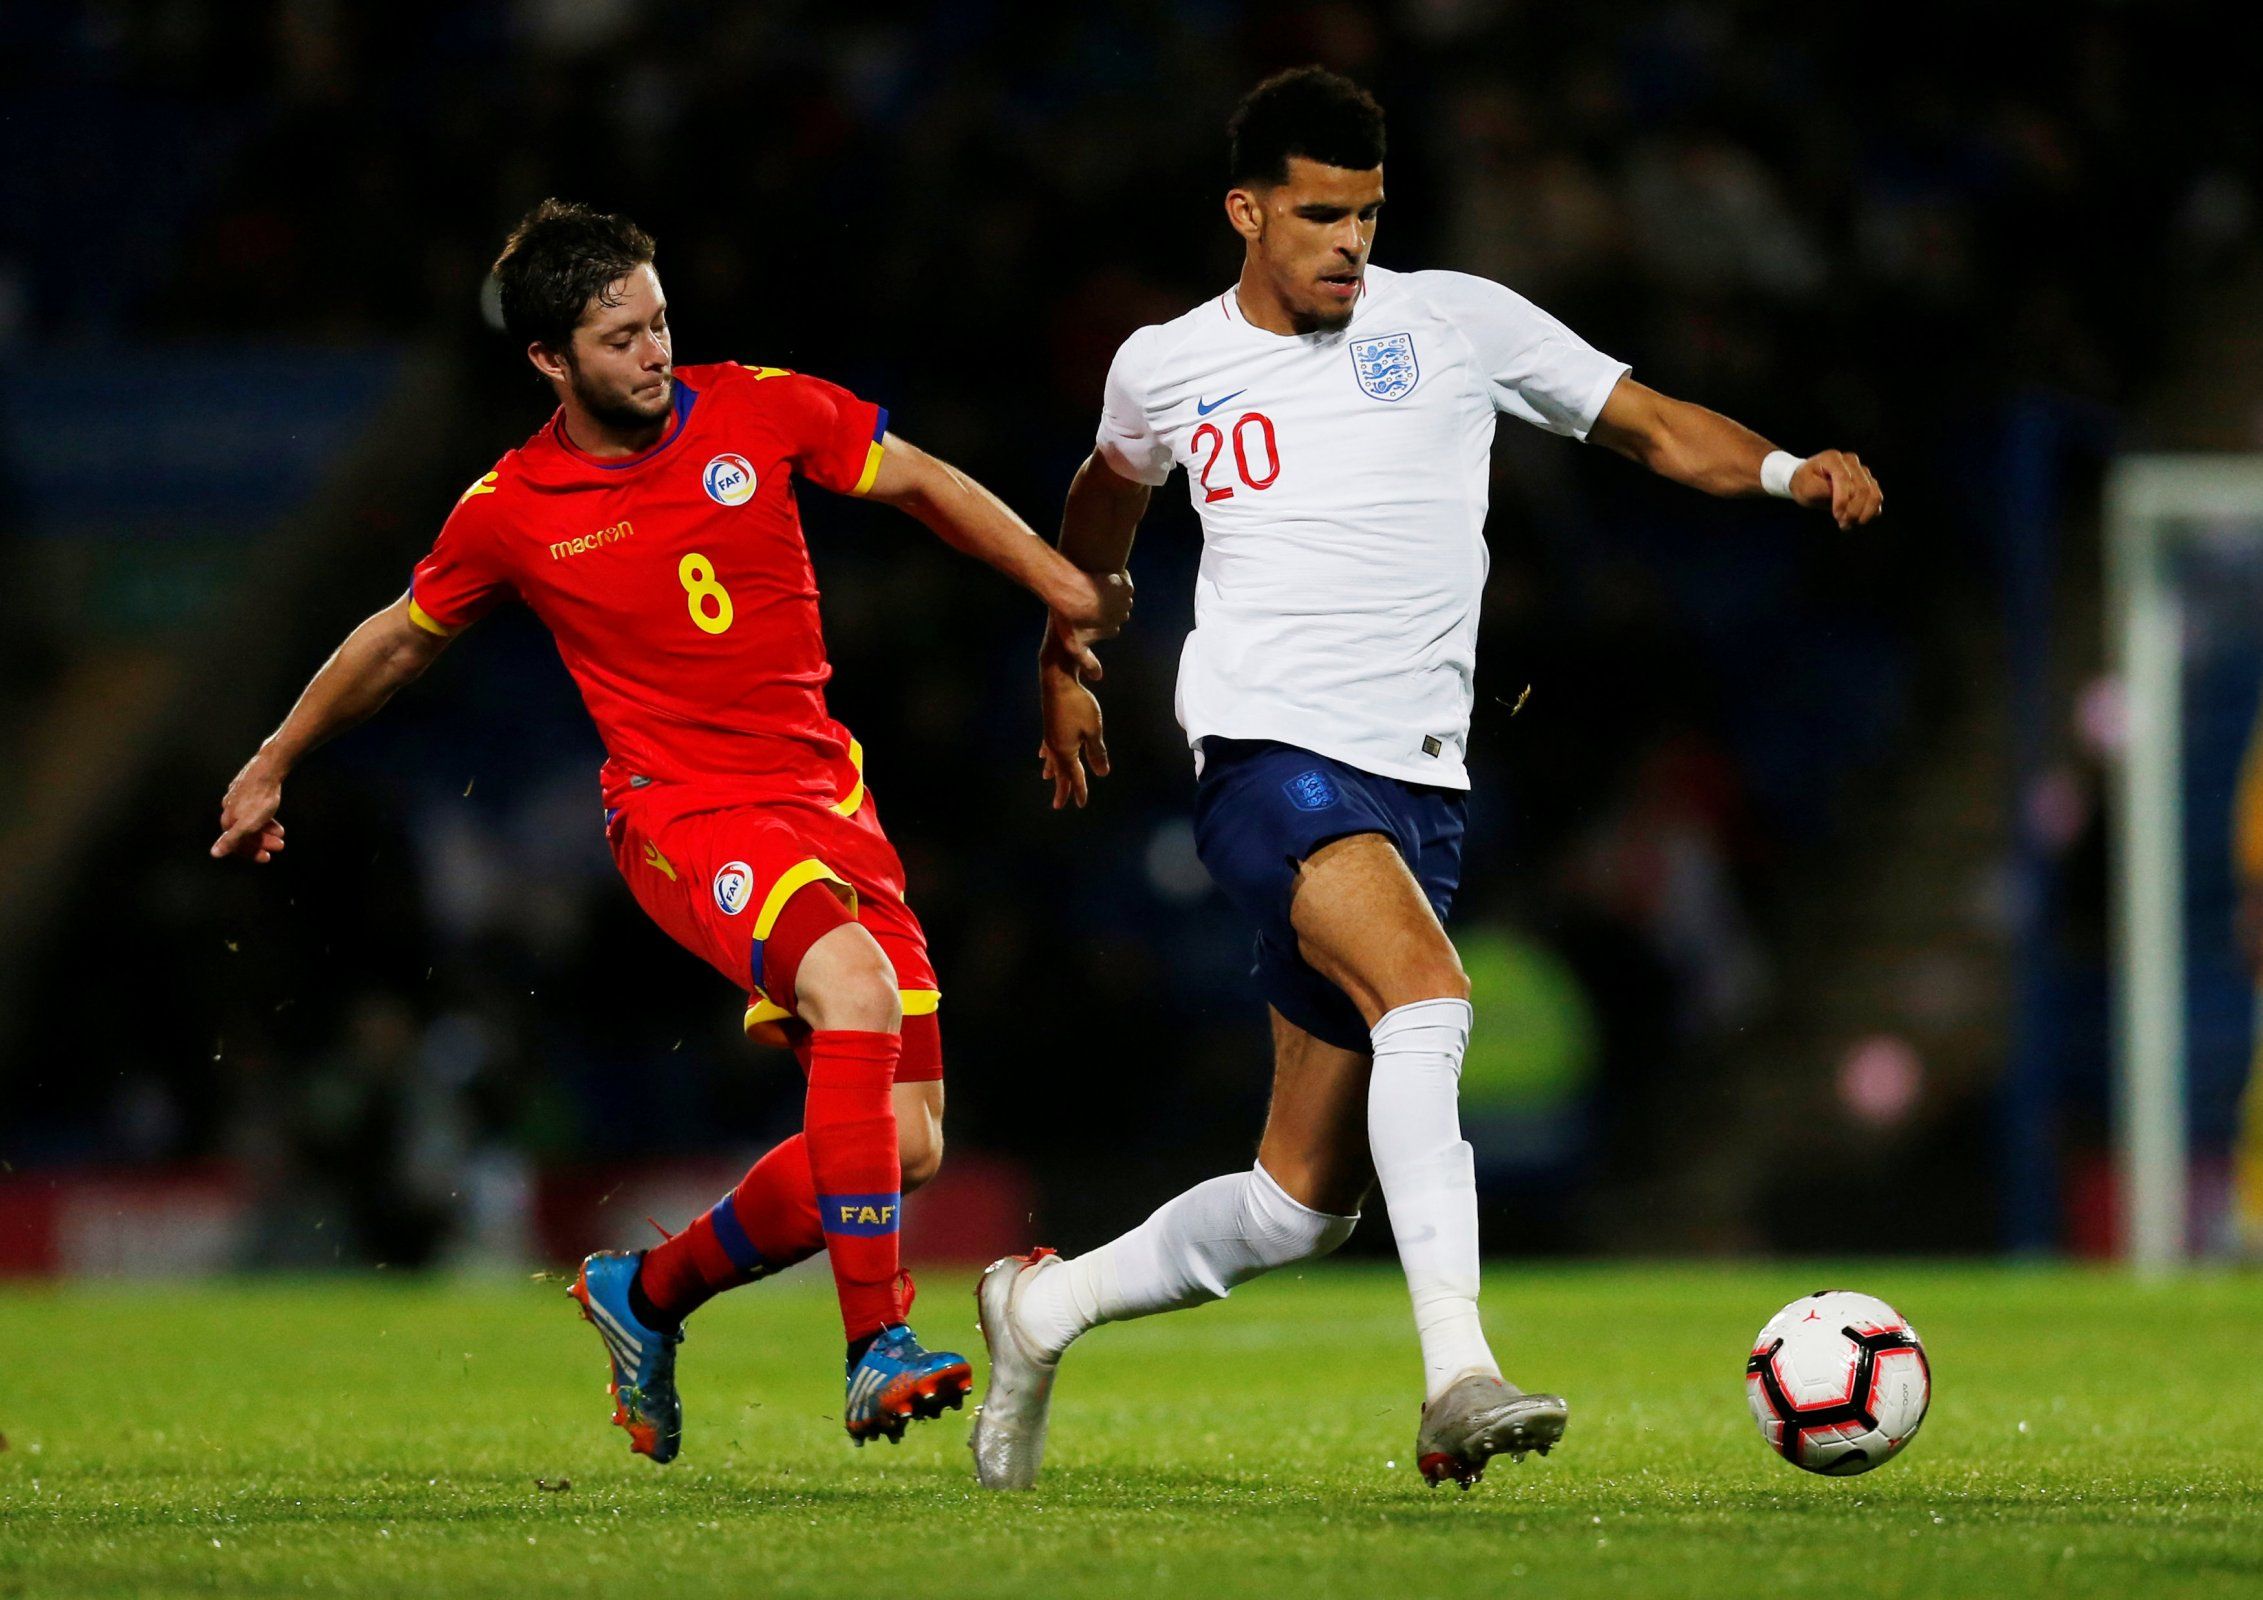 Dominic Solanke in action for England U21